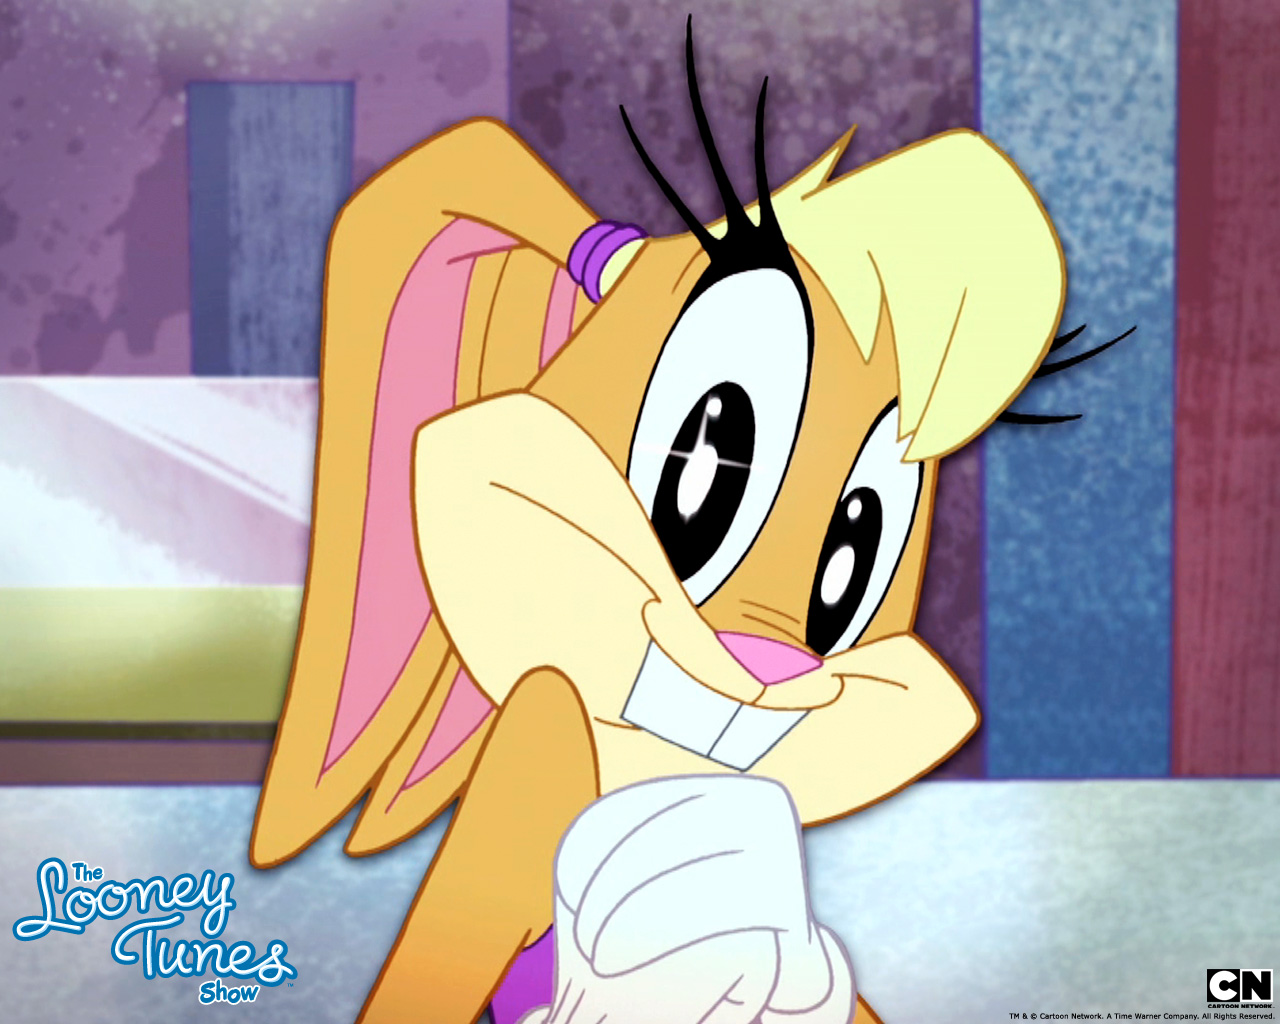 Double Date is the twelfth episode of The Looney Tunes Show. 